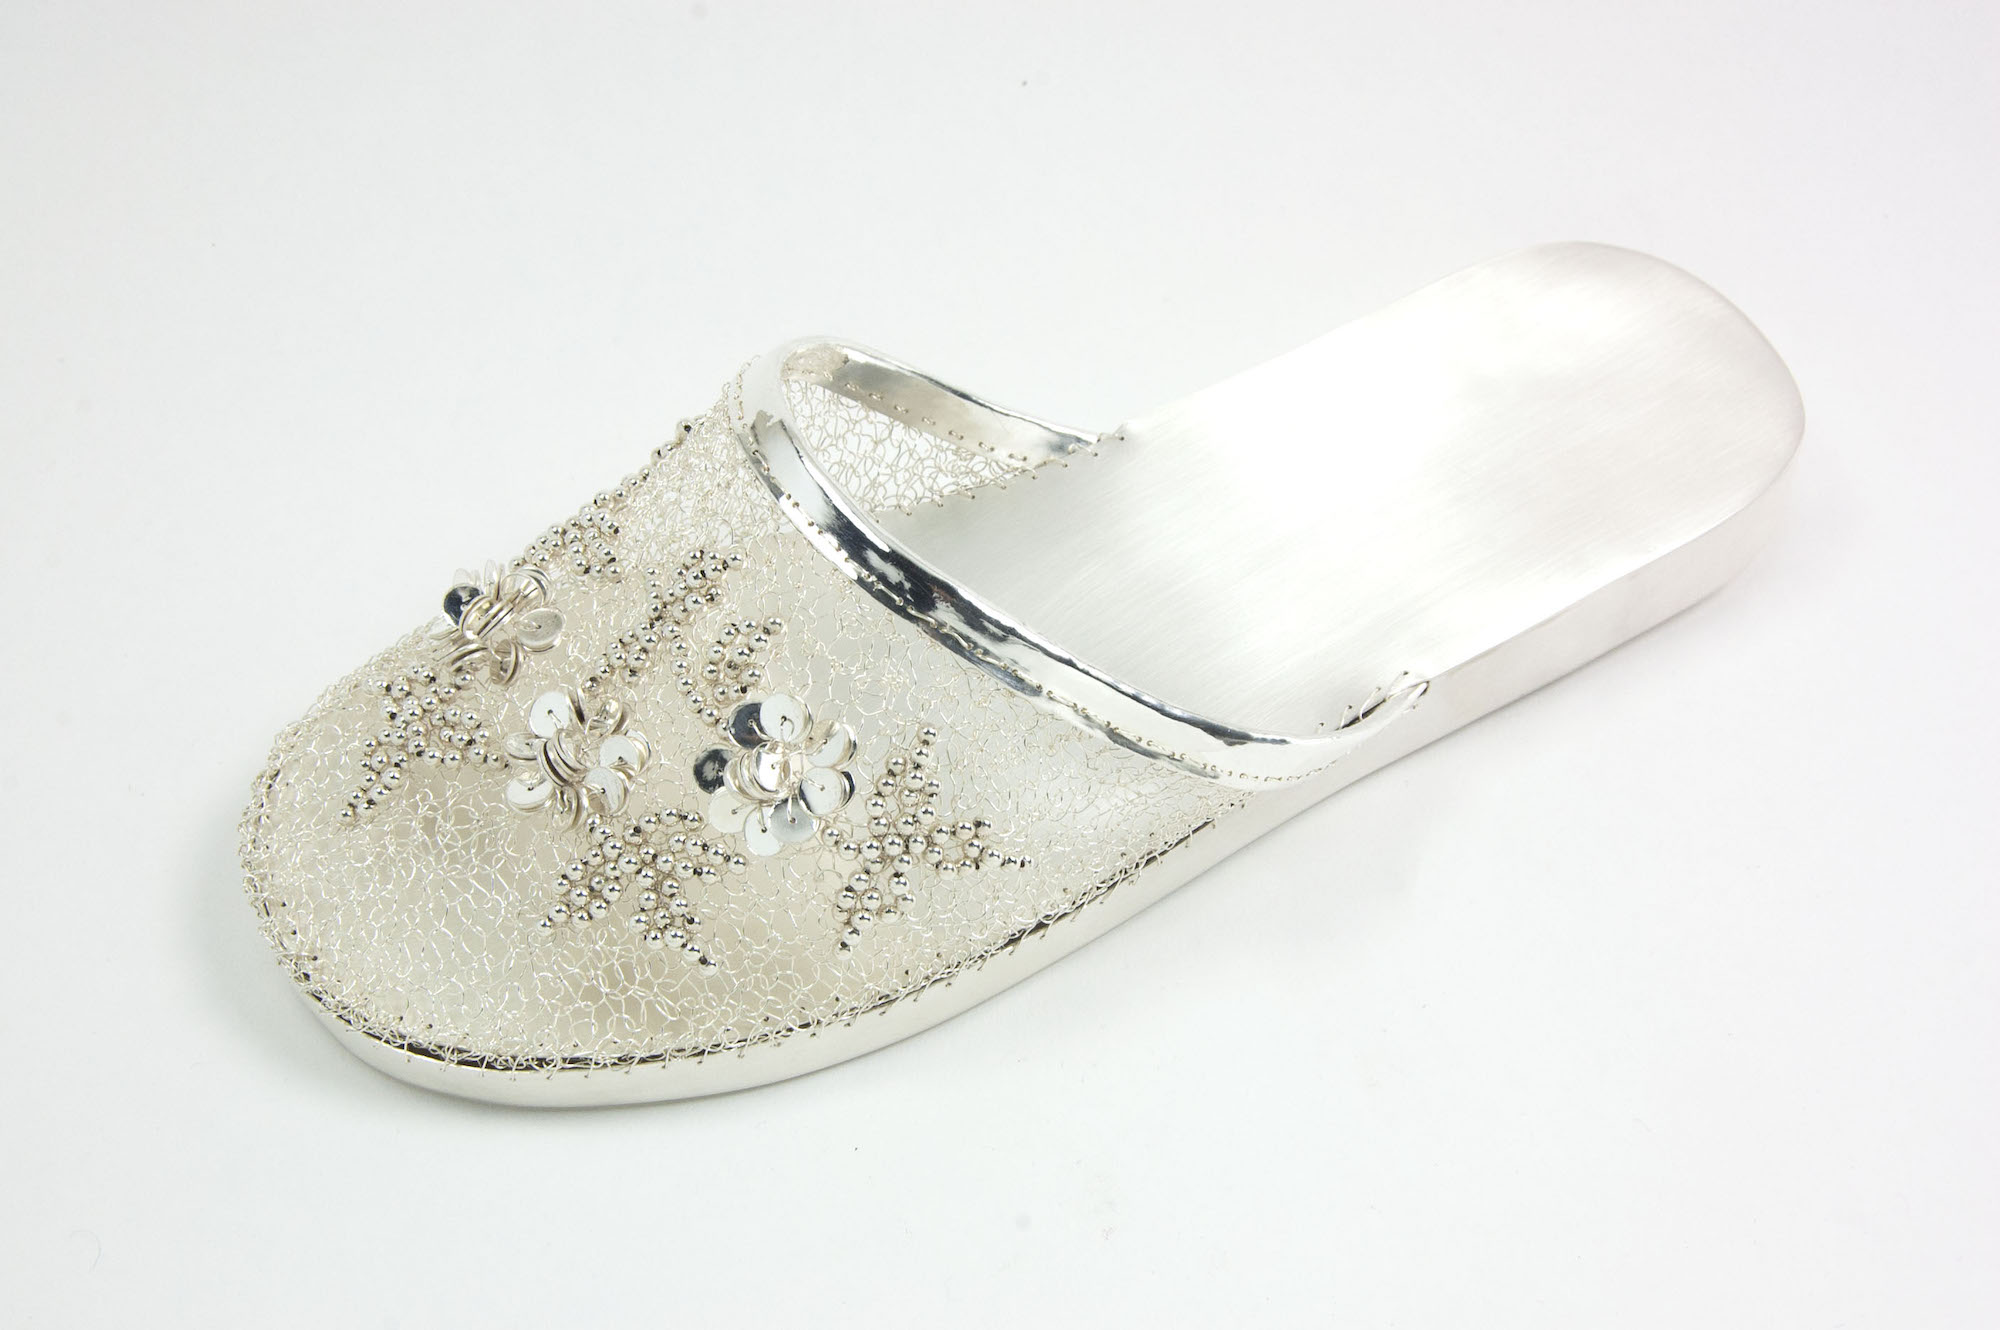 Ada Chen, “Chinese Slipper” (2017), fine silver with sterling silver beads, featured in Collective Ground at Steuben Gallery